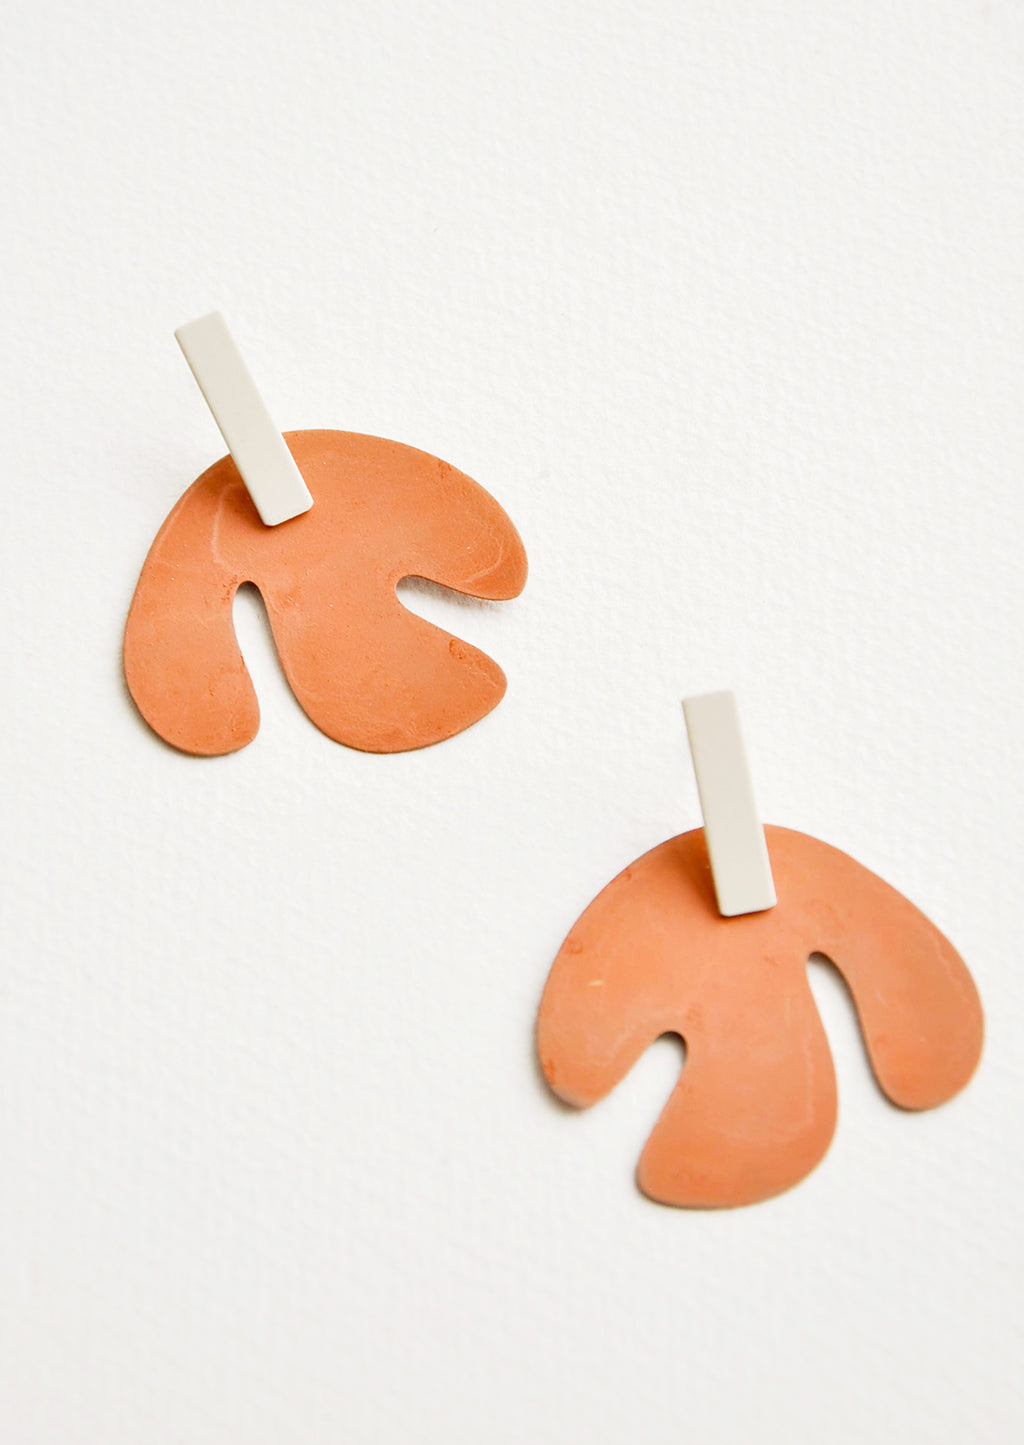 Dark Peach / Cream: Post earrings with orange asymmetric leaf shape hanging from small silver rectangle.